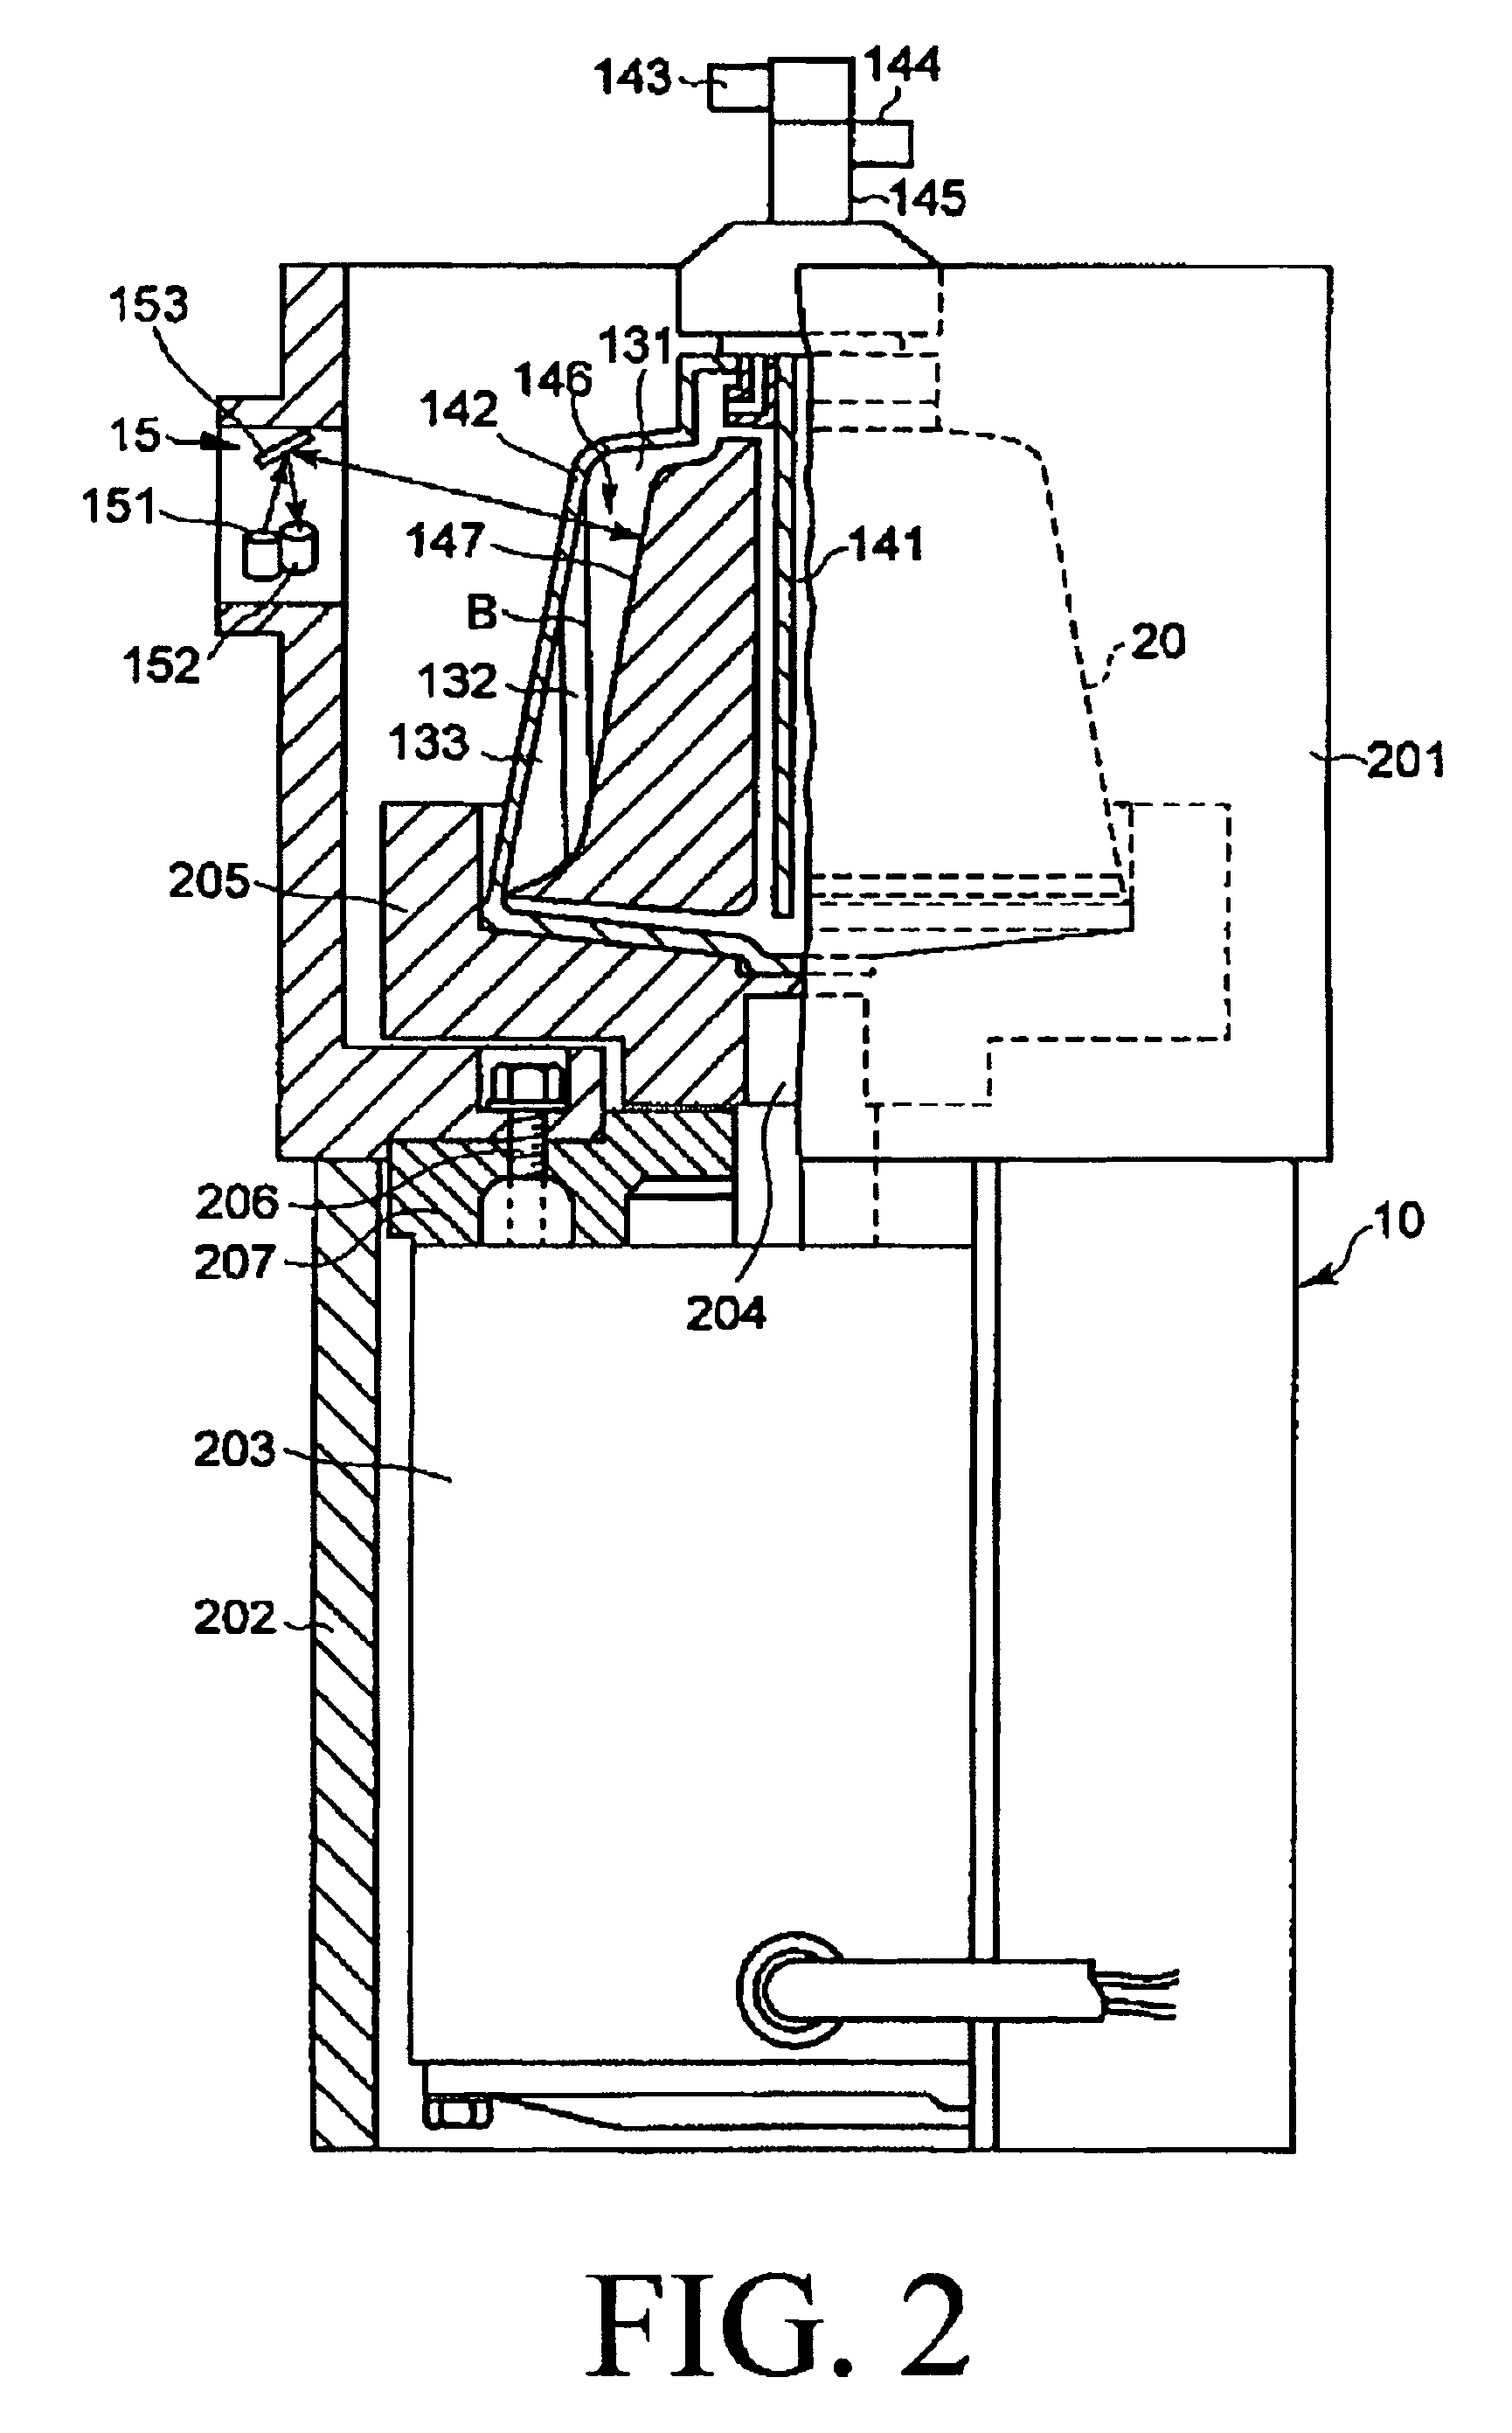 Circuit for collecting blood component and apparatus for collecting blood component